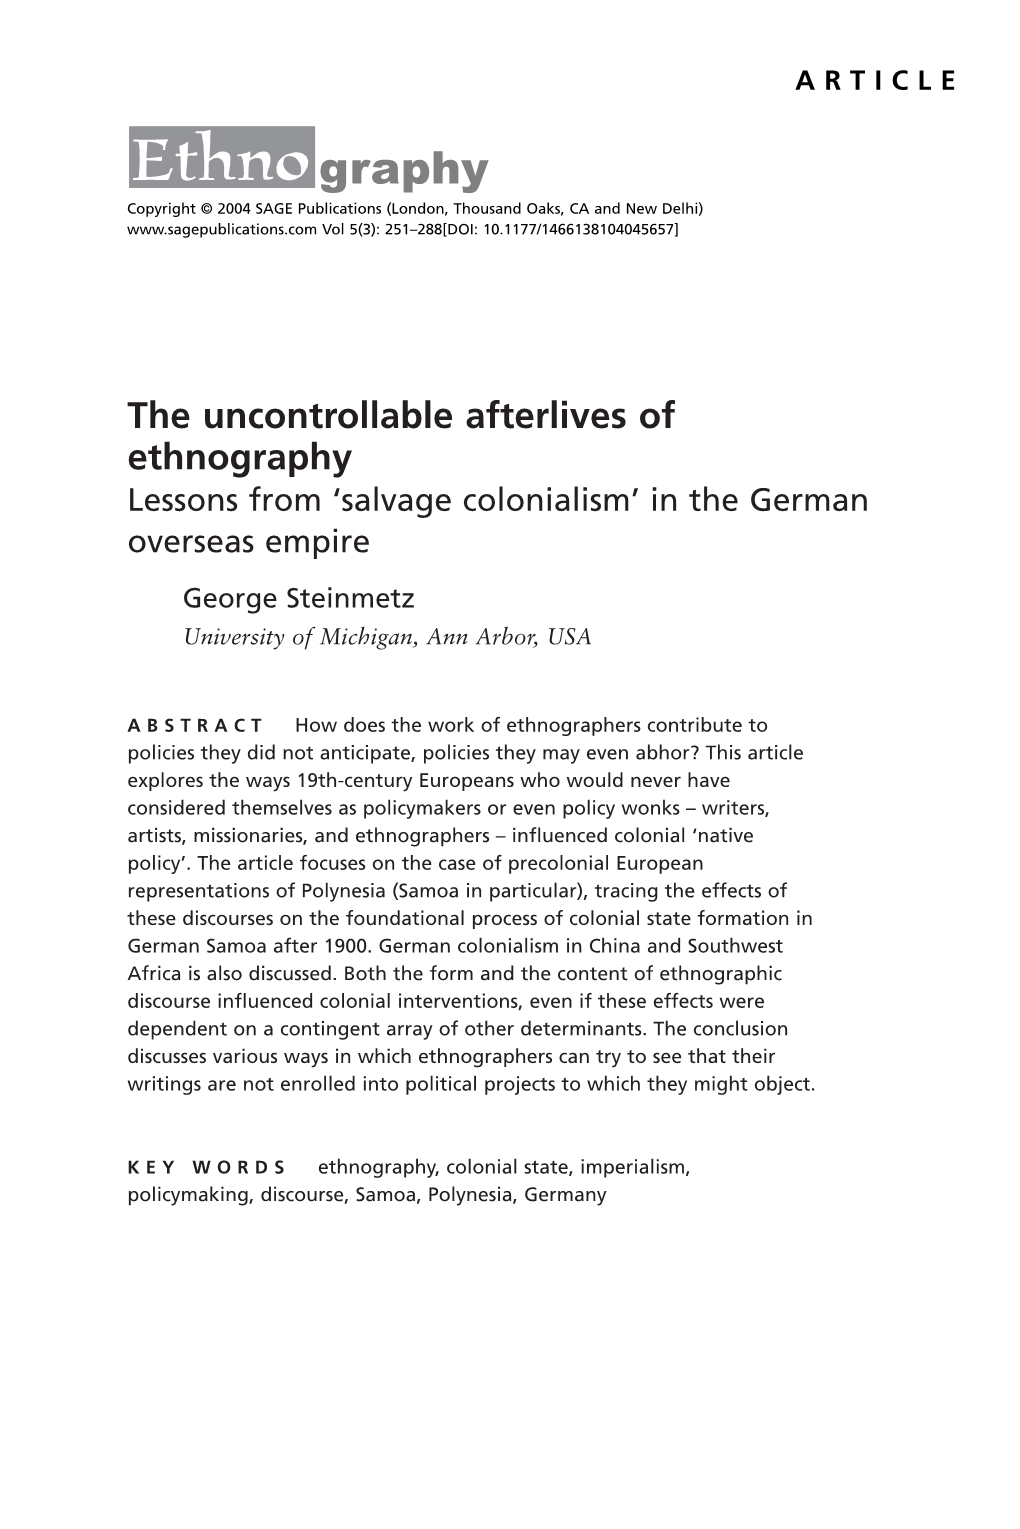 The Uncontrollable Afterlives of Ethnography